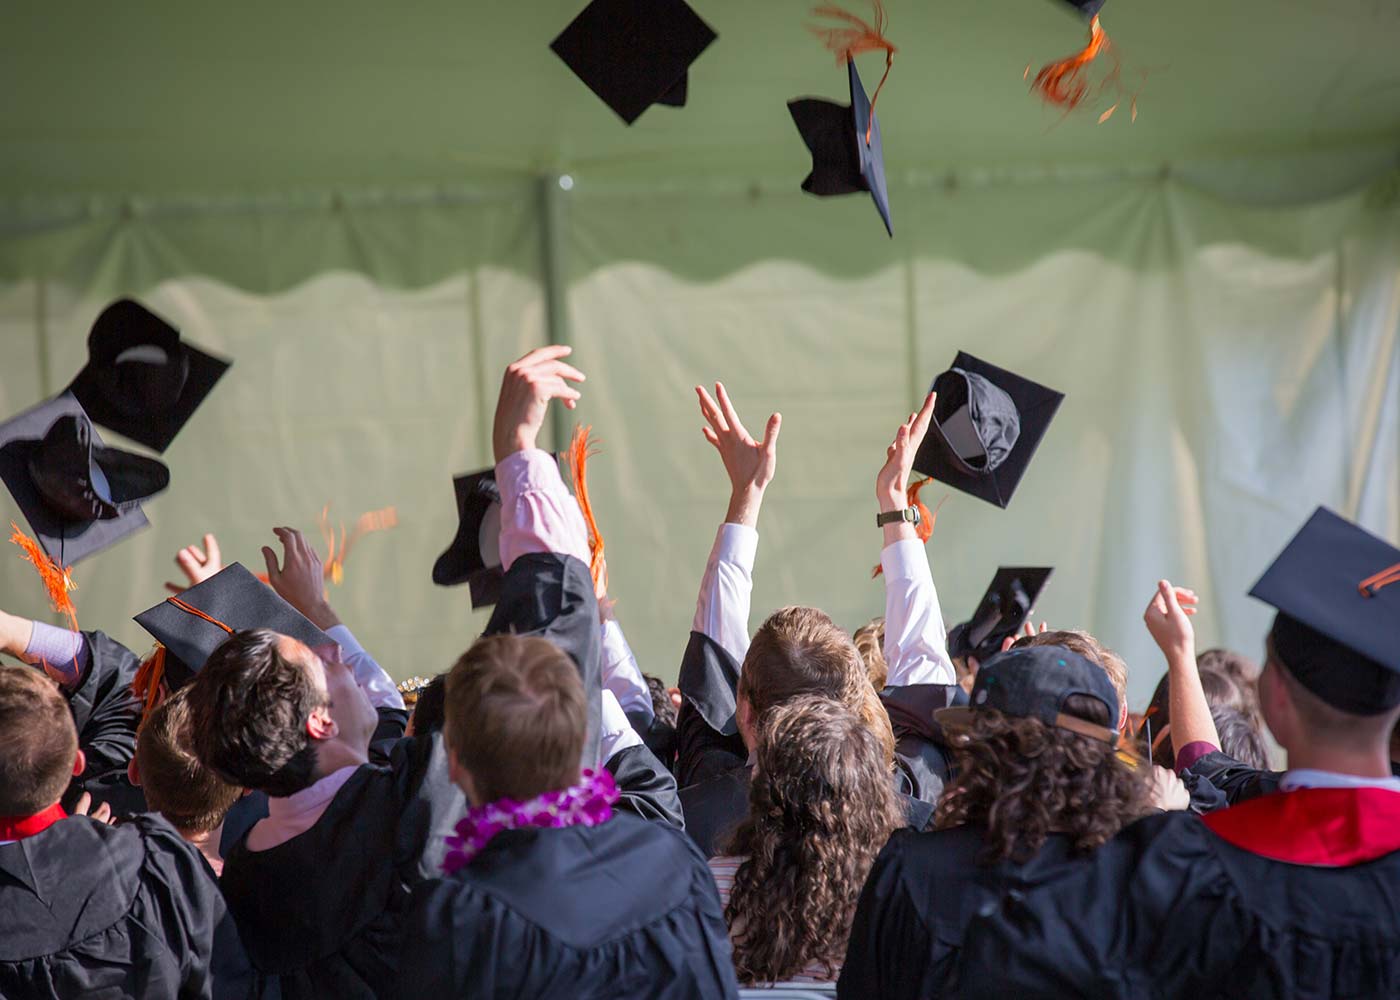 5 Great Gifts to Get a Graduating College Student